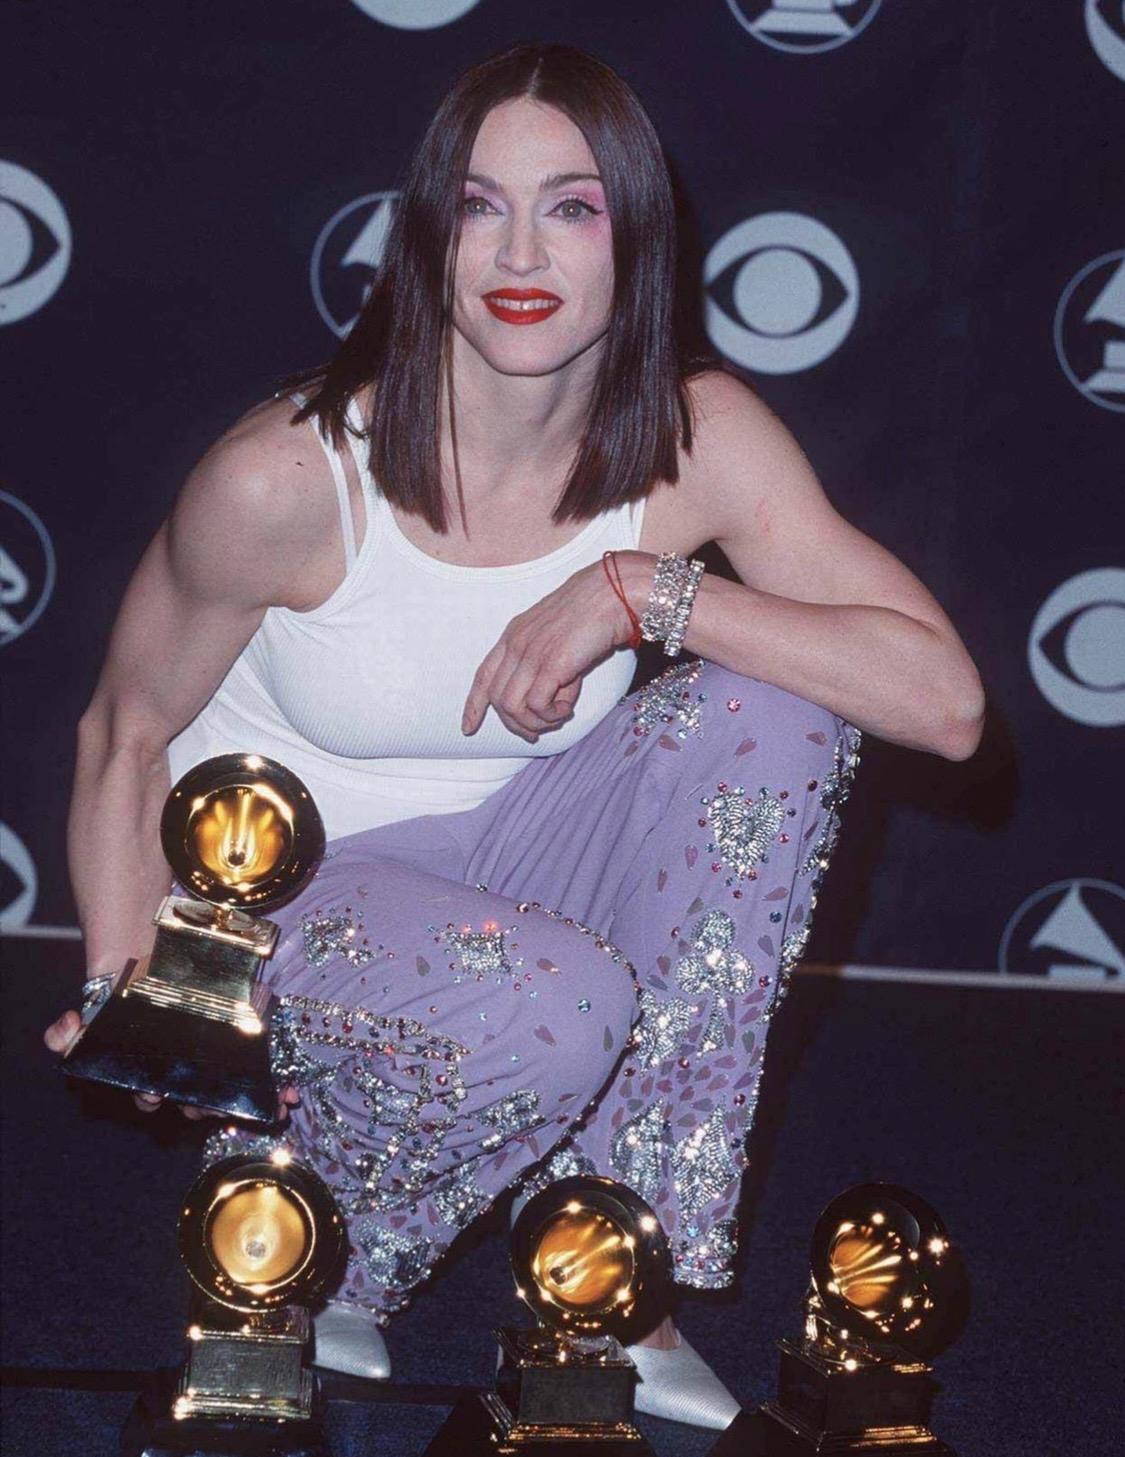 Presenting an unbelievable pair of rhinestone embellished lavender wool pants from Tom Ford's famous 'Las Vegas hippy' collection with Gucci. Most famously worn by Madonna to the 1999 Grammys, where she opened the show and left with four awards, and